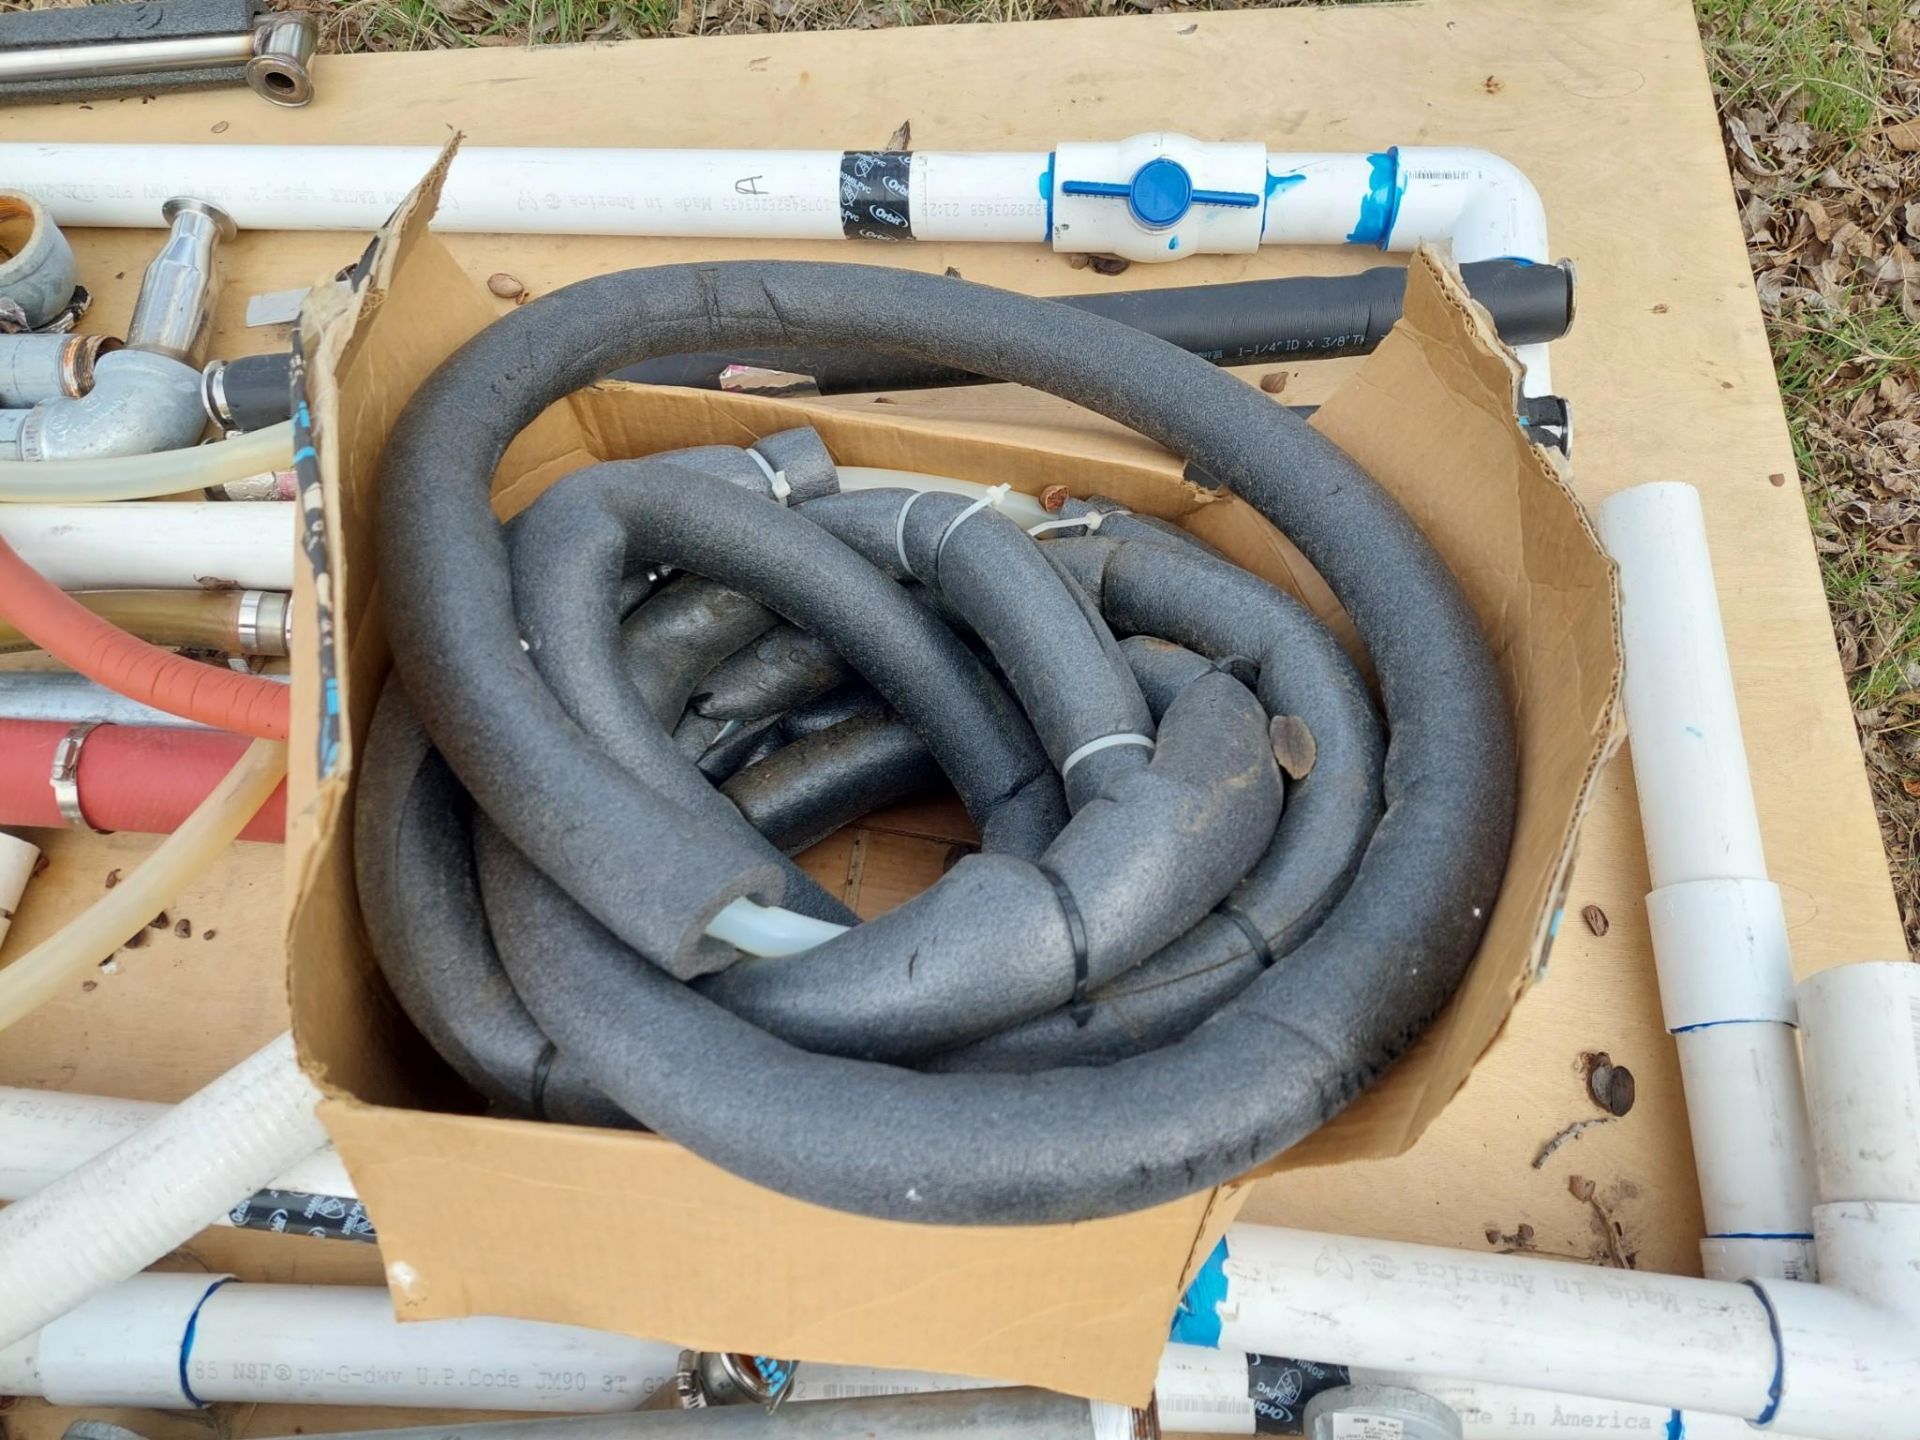 PLASTIC/METAL PIPING & RUBBER TUBING FOR ETHANOL SYSTEM - Image 7 of 7